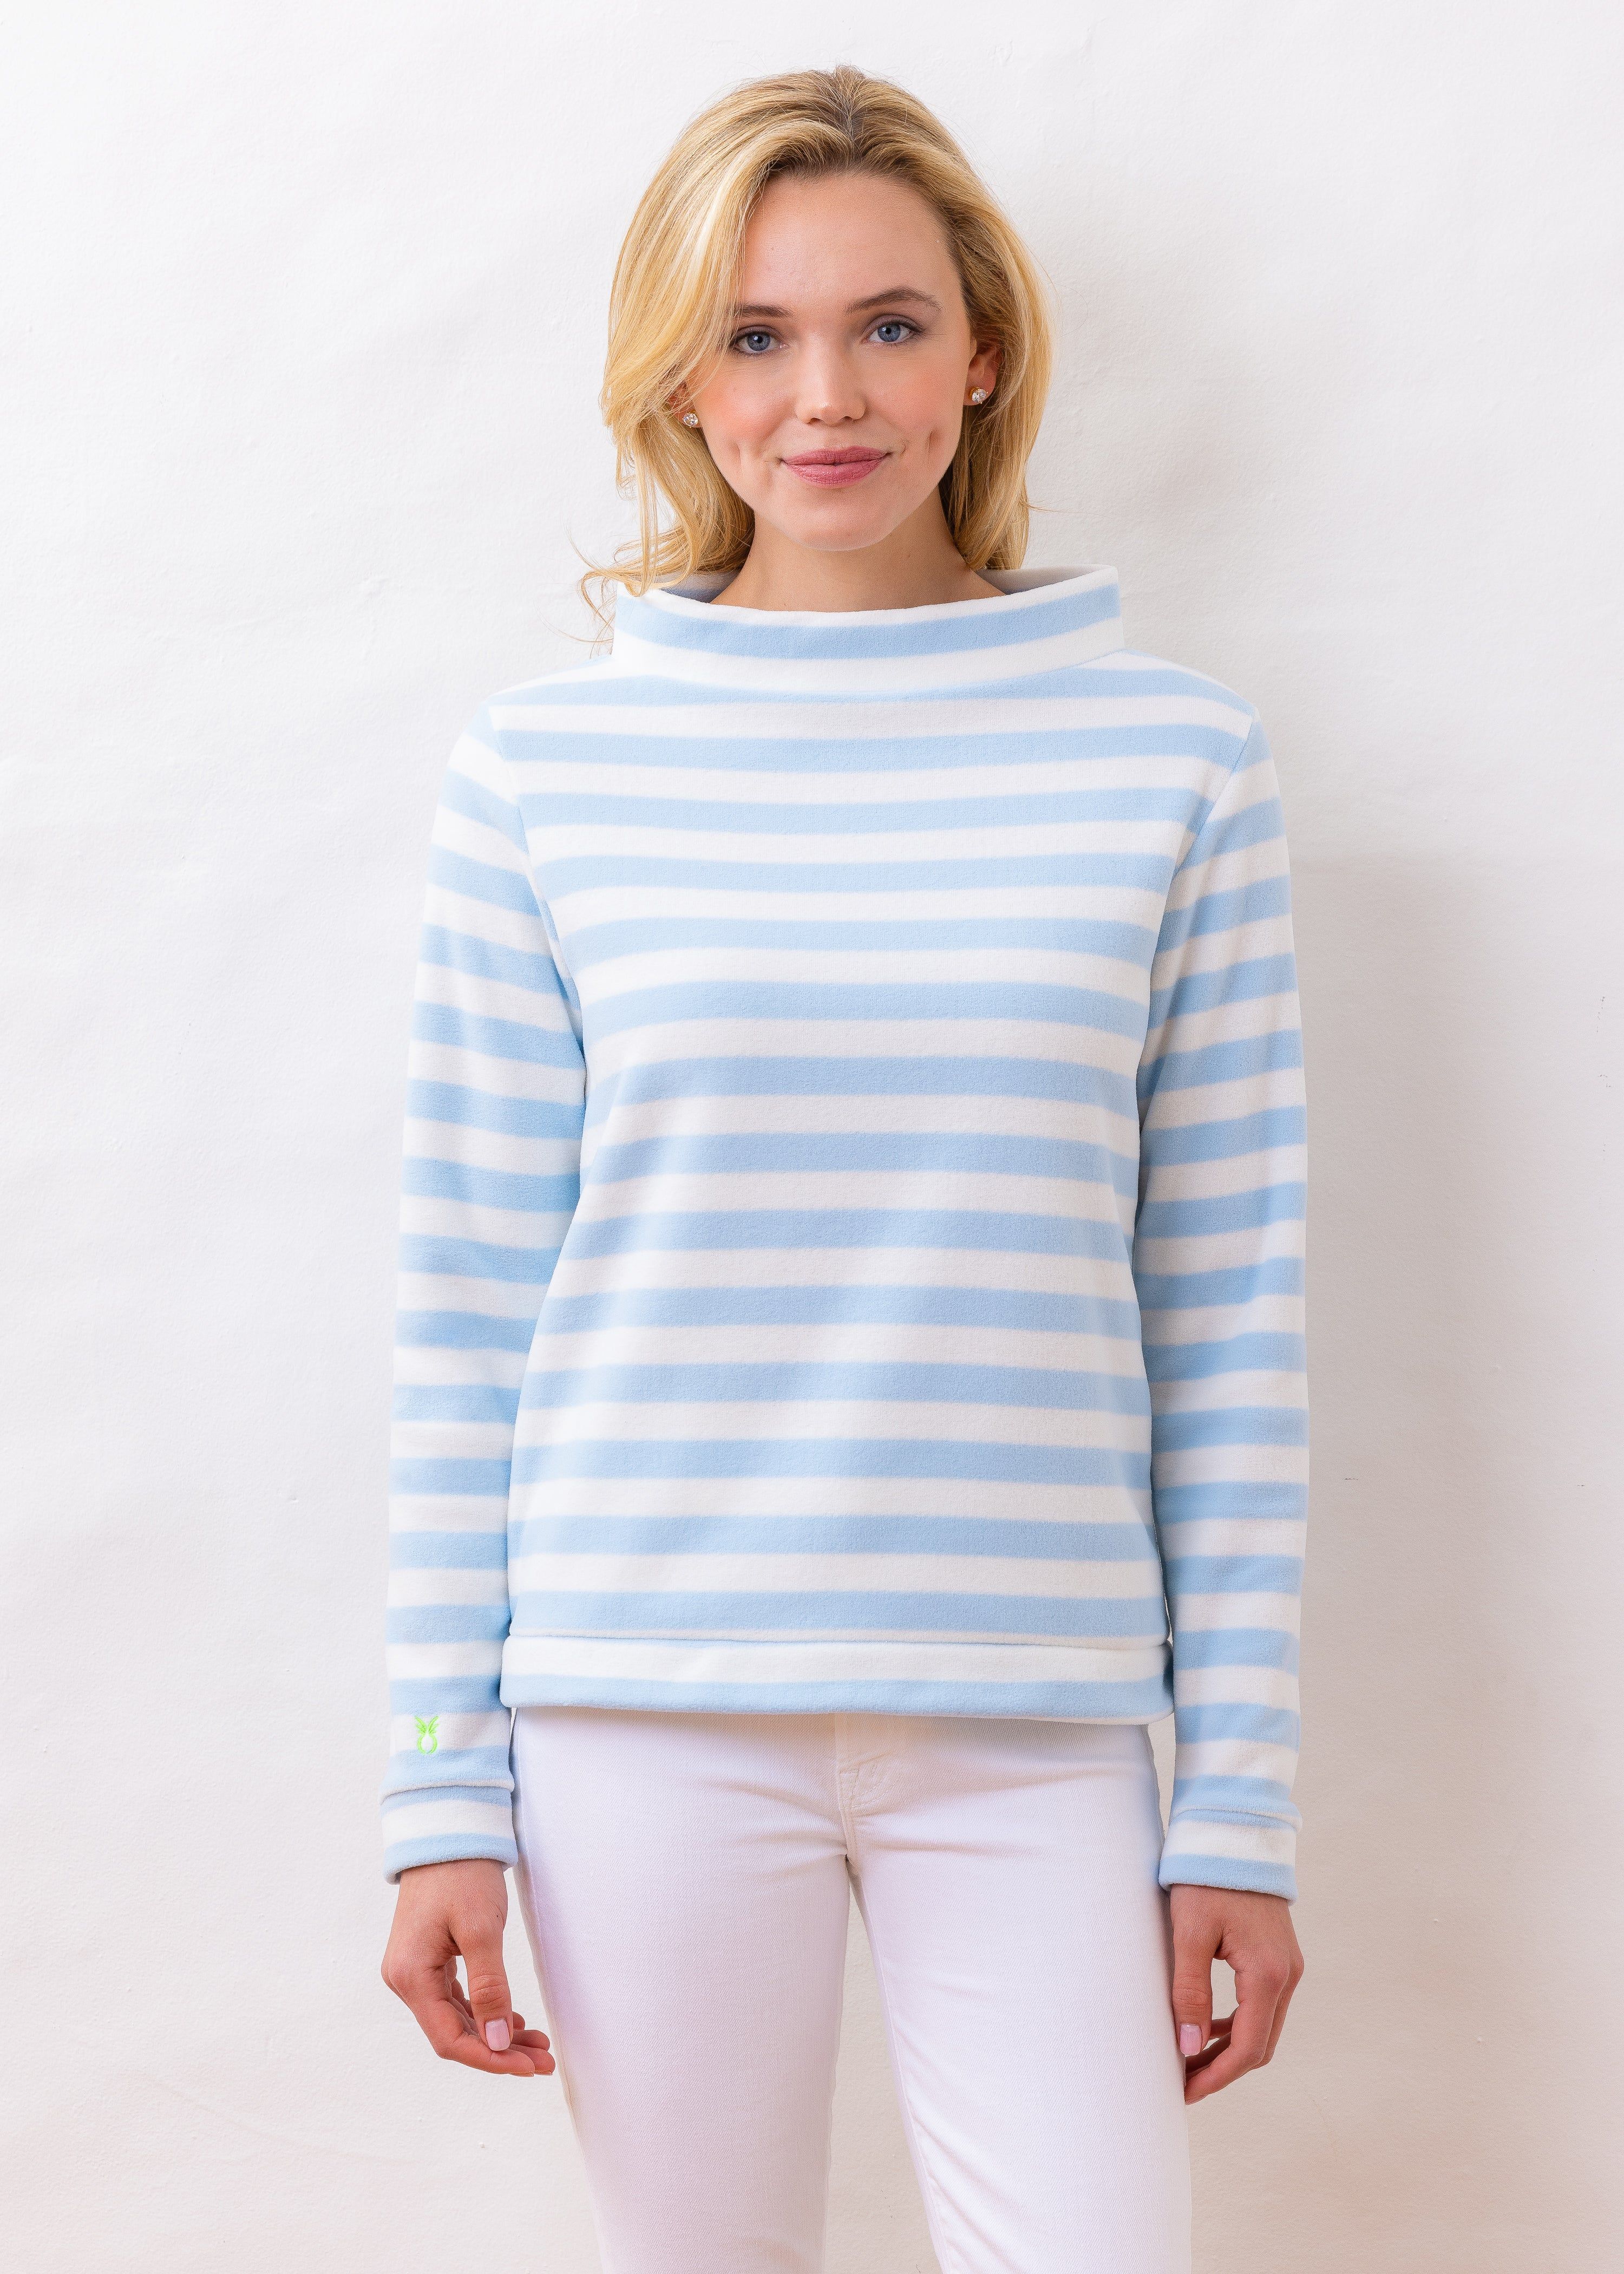 Brighton Boatneck Top in Striped Fleece (Ice Blue / White) | Dudley Stephens